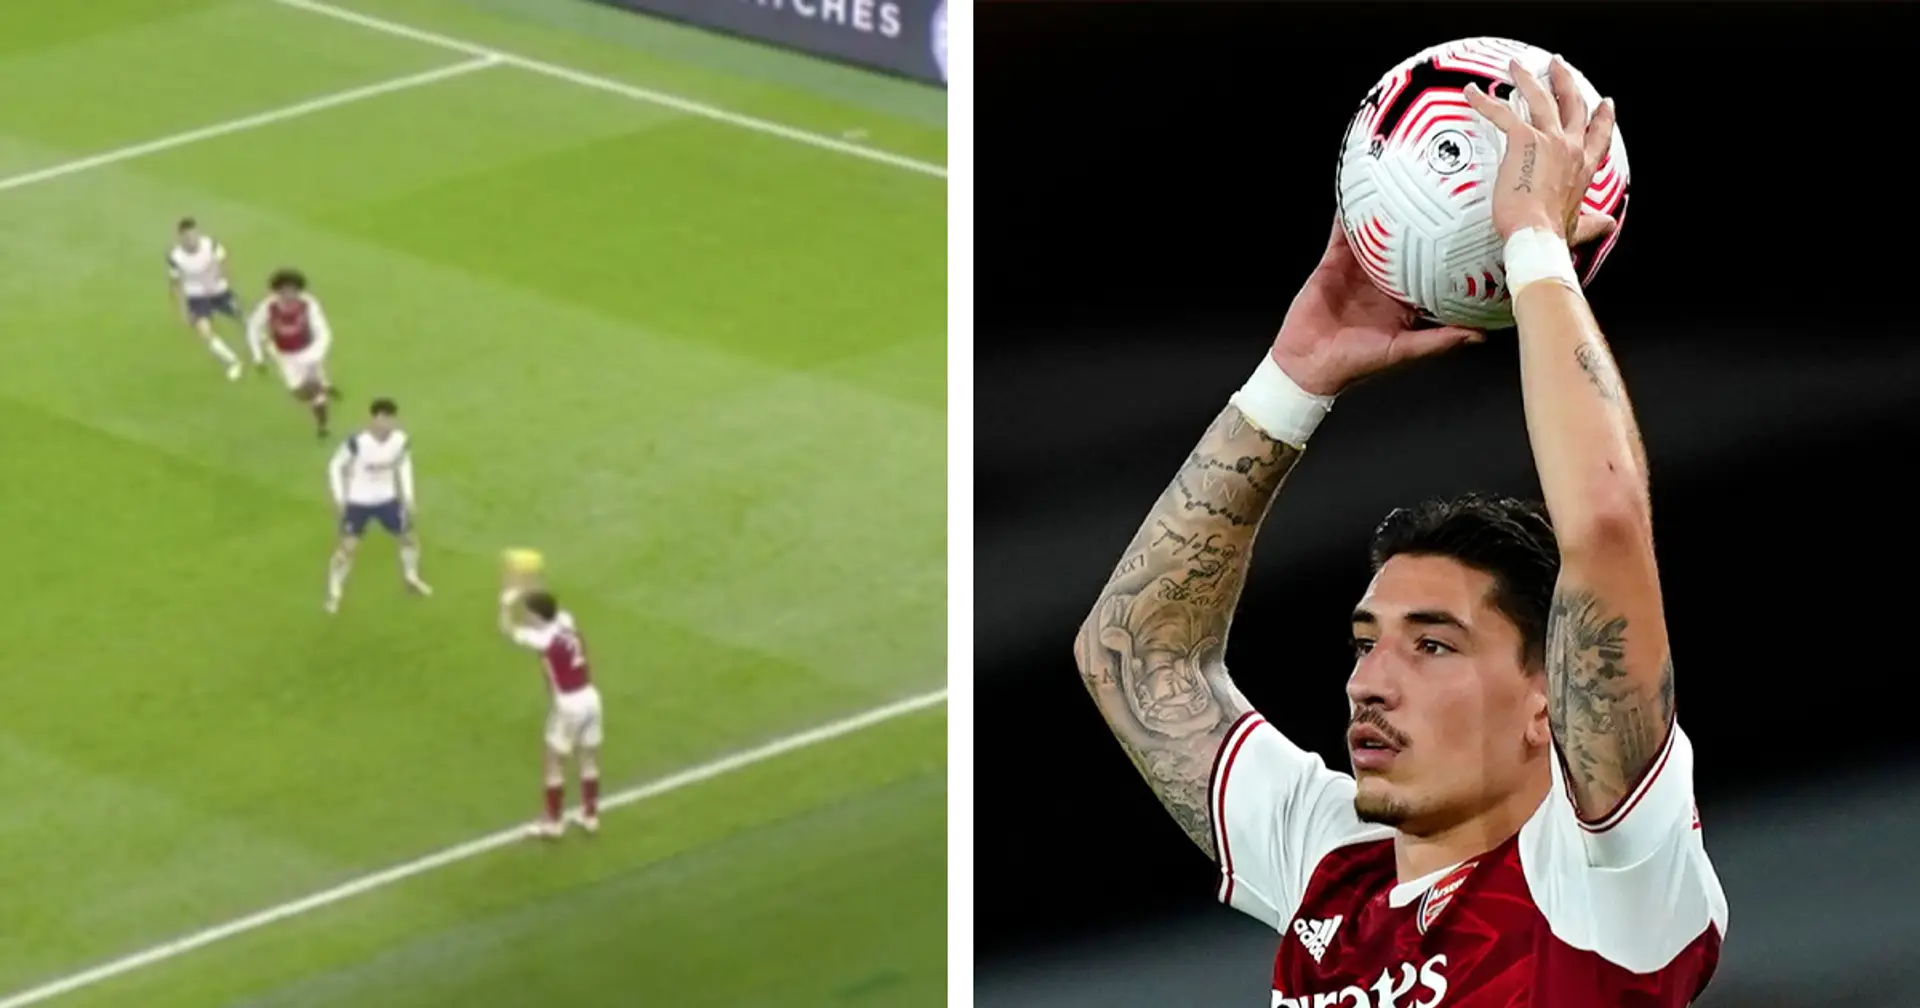 'There have been many, many incidents, much worse than that but they were never given as foul throws': Mikel Arteta defends Hector Bellerin